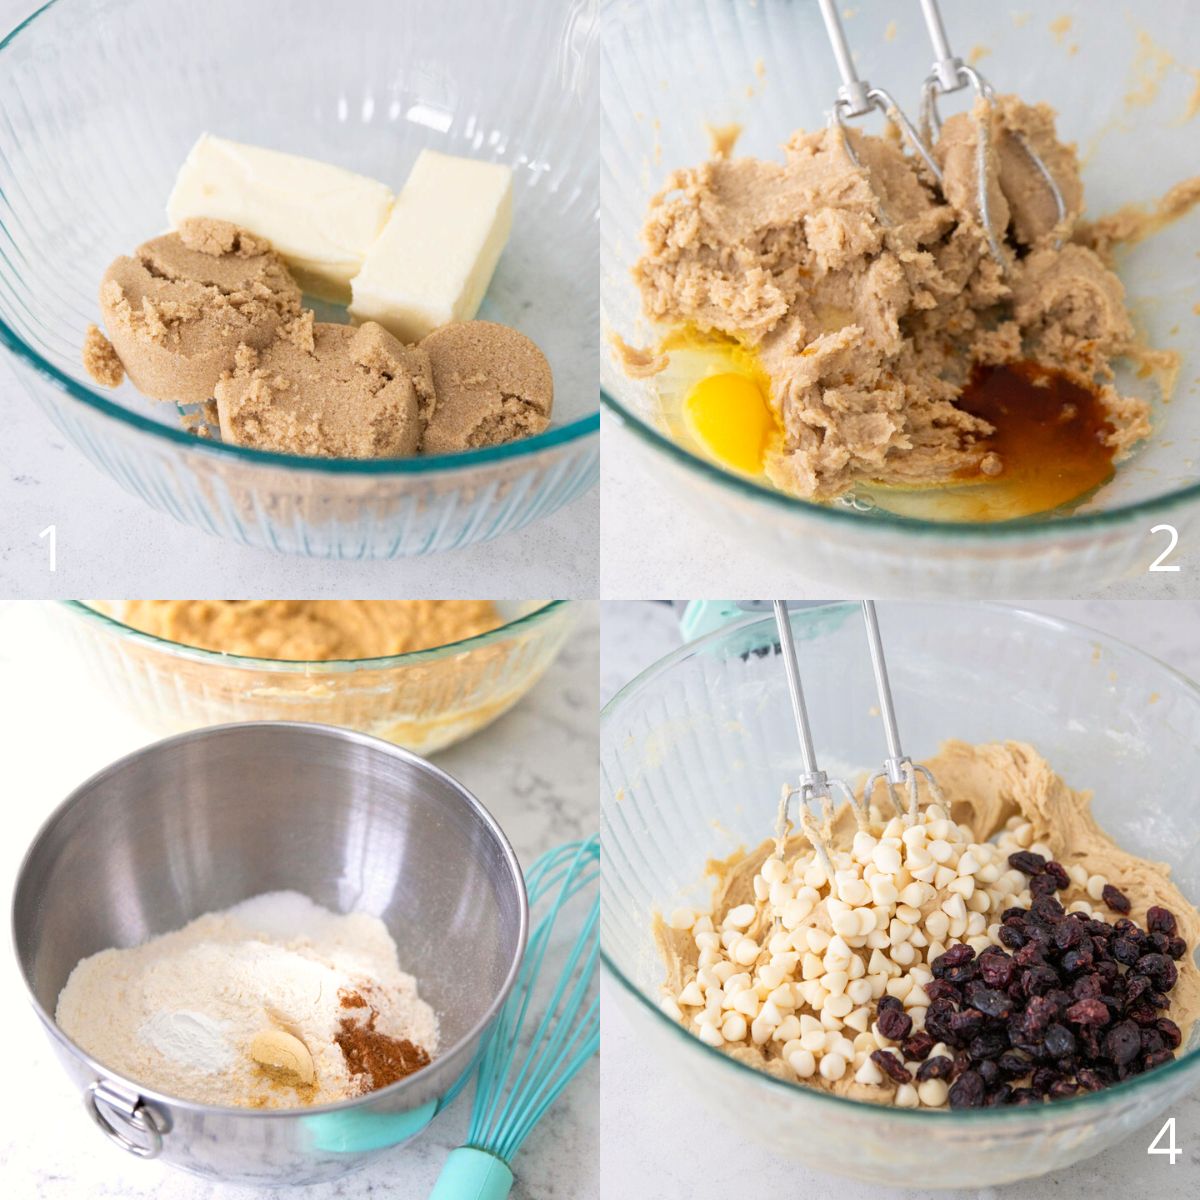 The step by step photos show how to prepare the cookie dough base for the cranberry bars.